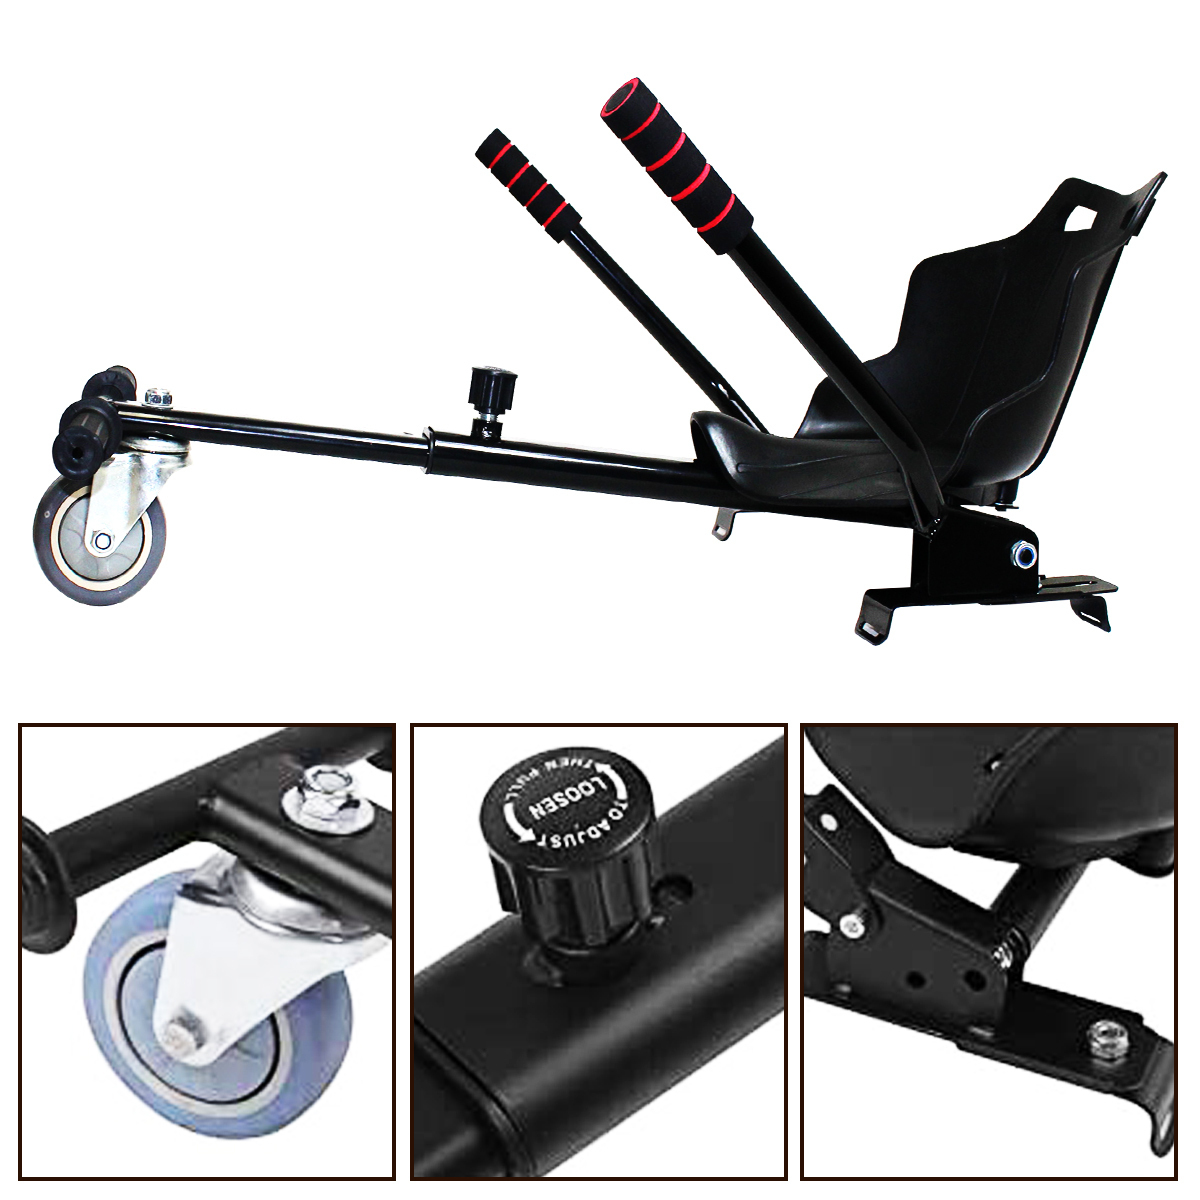  great popularity! Attachment balance scooter ho Barker to black black three wheel electric scooter Mini scooter for drift frame 